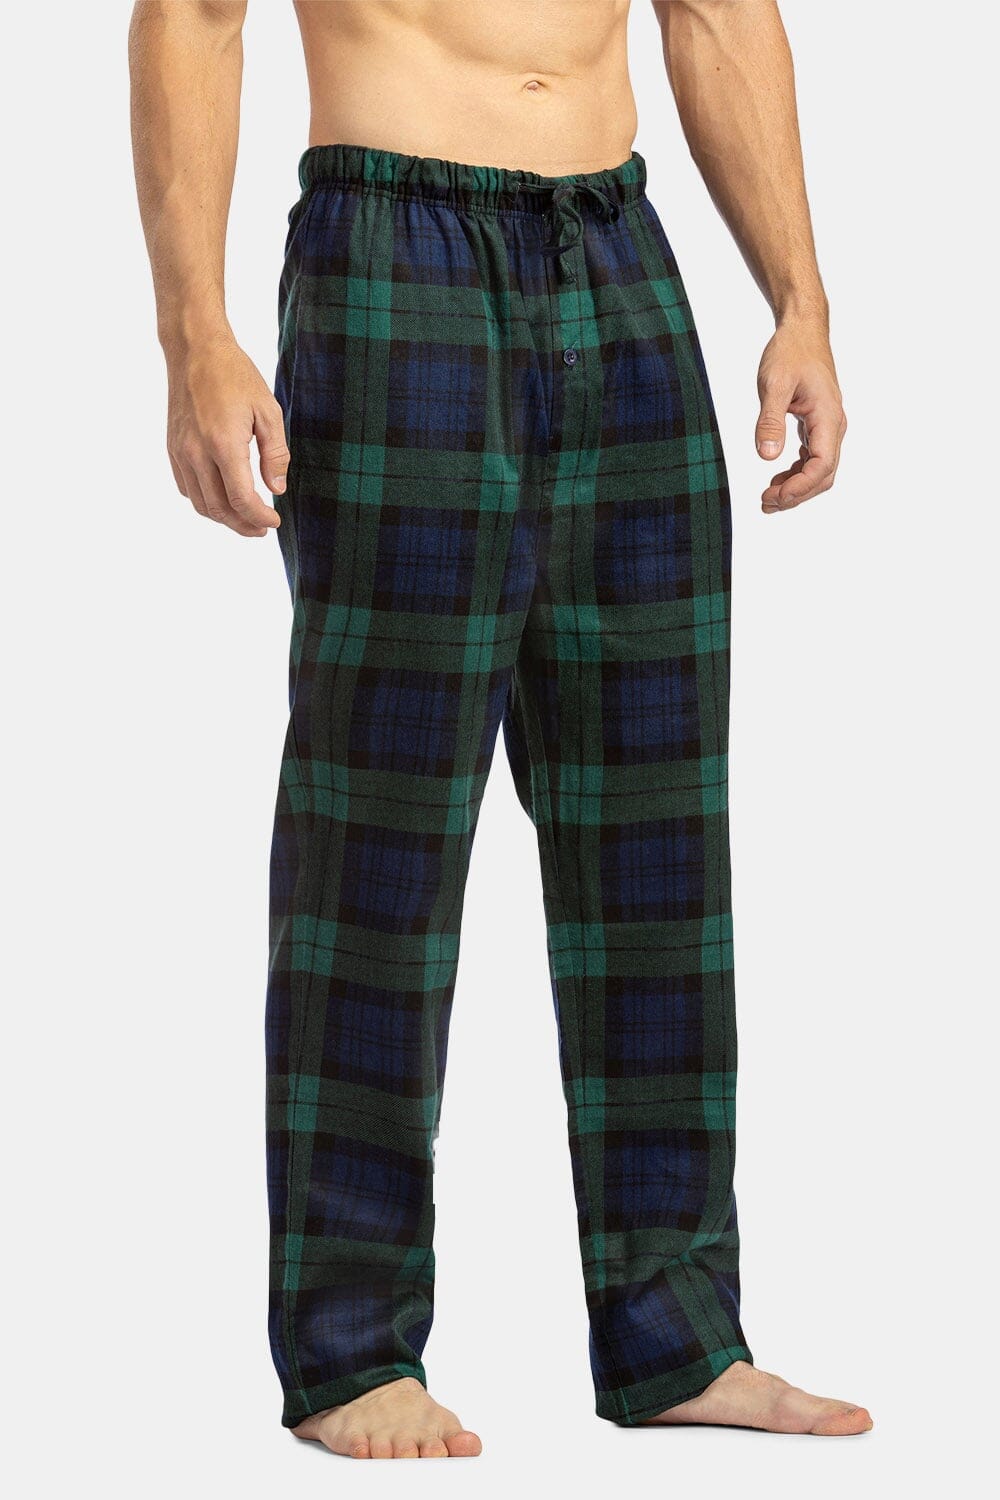 Mens Sleep Shorts Made With Portuguese Flannel